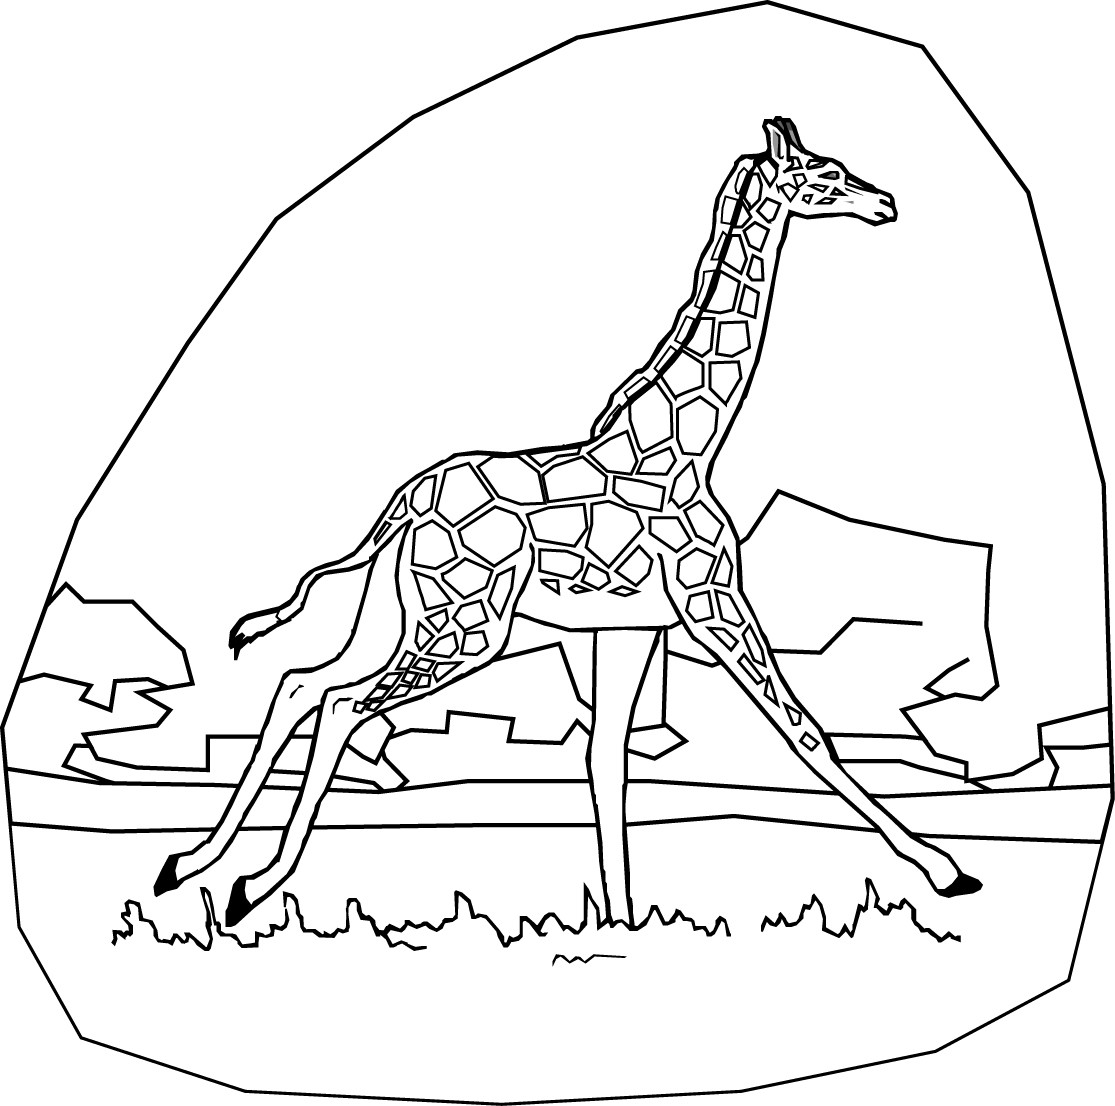 Giraffe Coloring Pages For Kids
 Coloring Pages for Kids Giraffe Coloring Pages for Kids